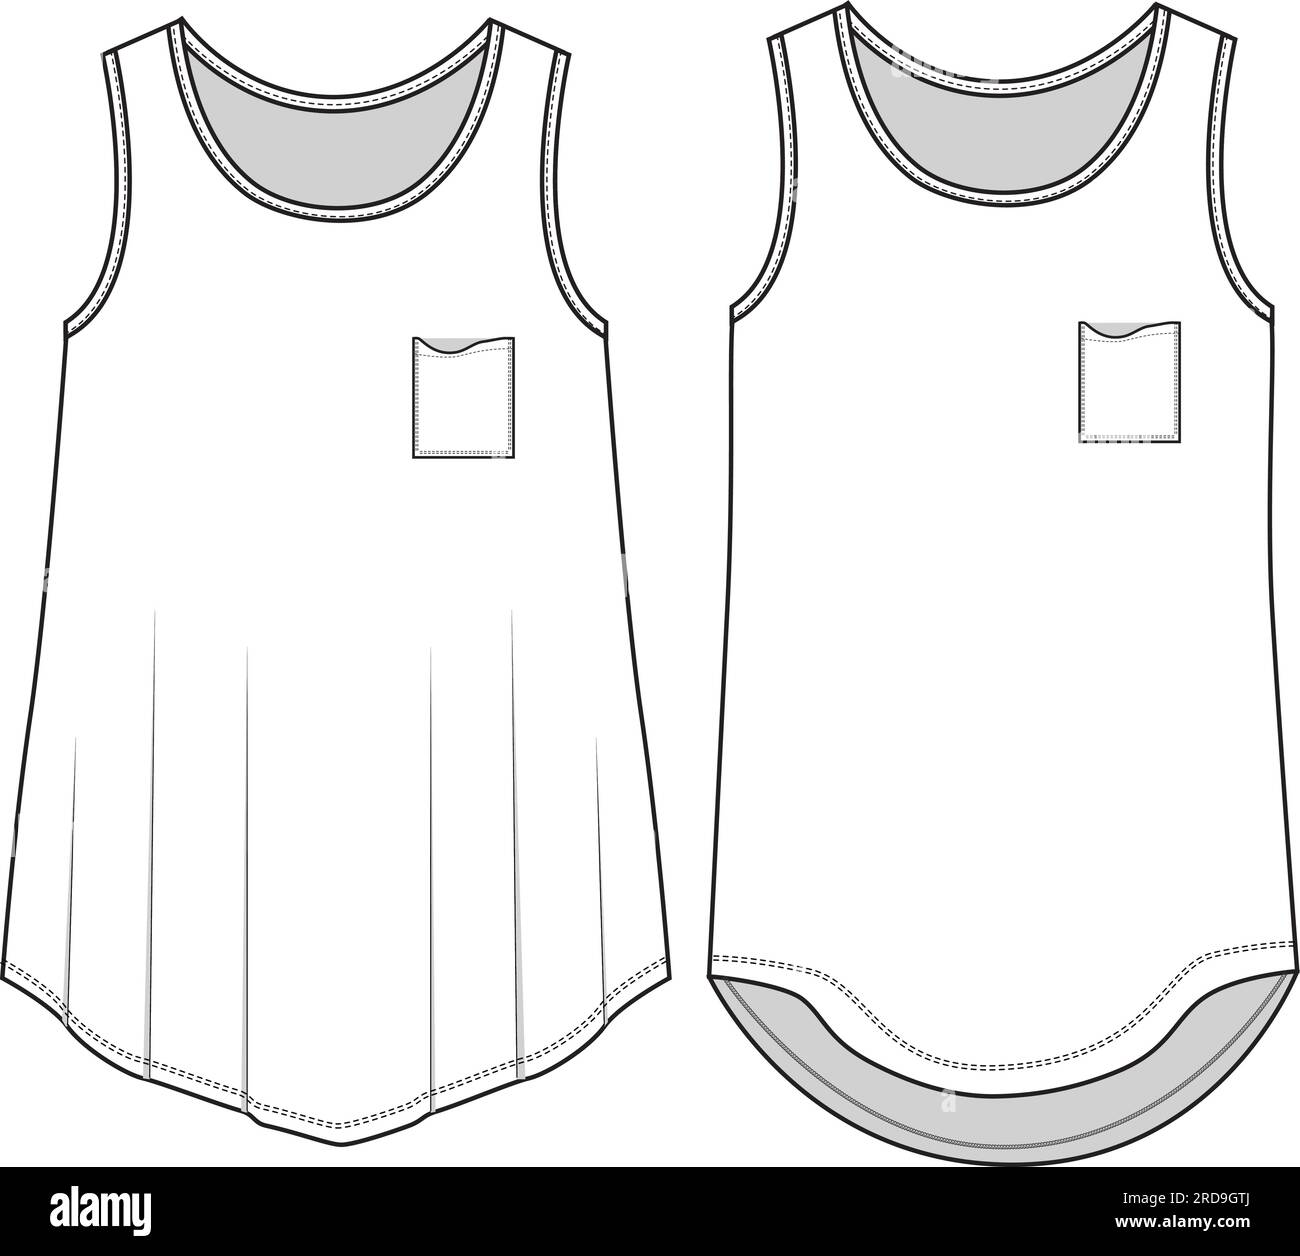 Women trendy Fashionable Tank tops with pocket Sketch vector Women trendy Fashionable Tank tops with pocket Sketch vector Stock Vector